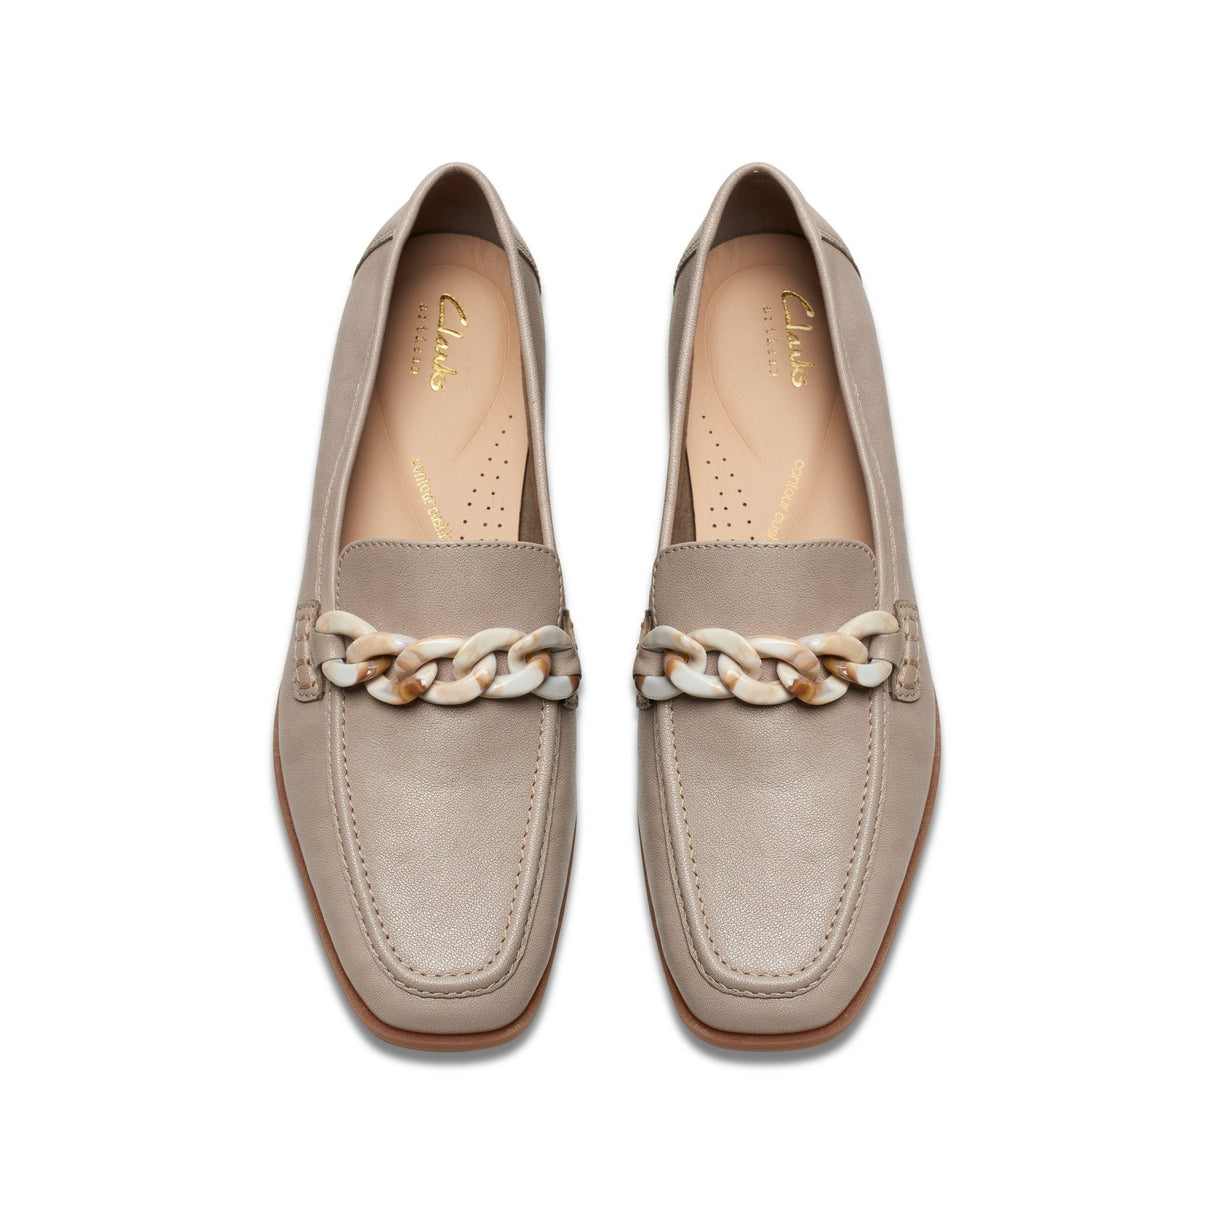 Clarks Women's Sarafyna Iris Loafers - A&M Clothing & Shoes